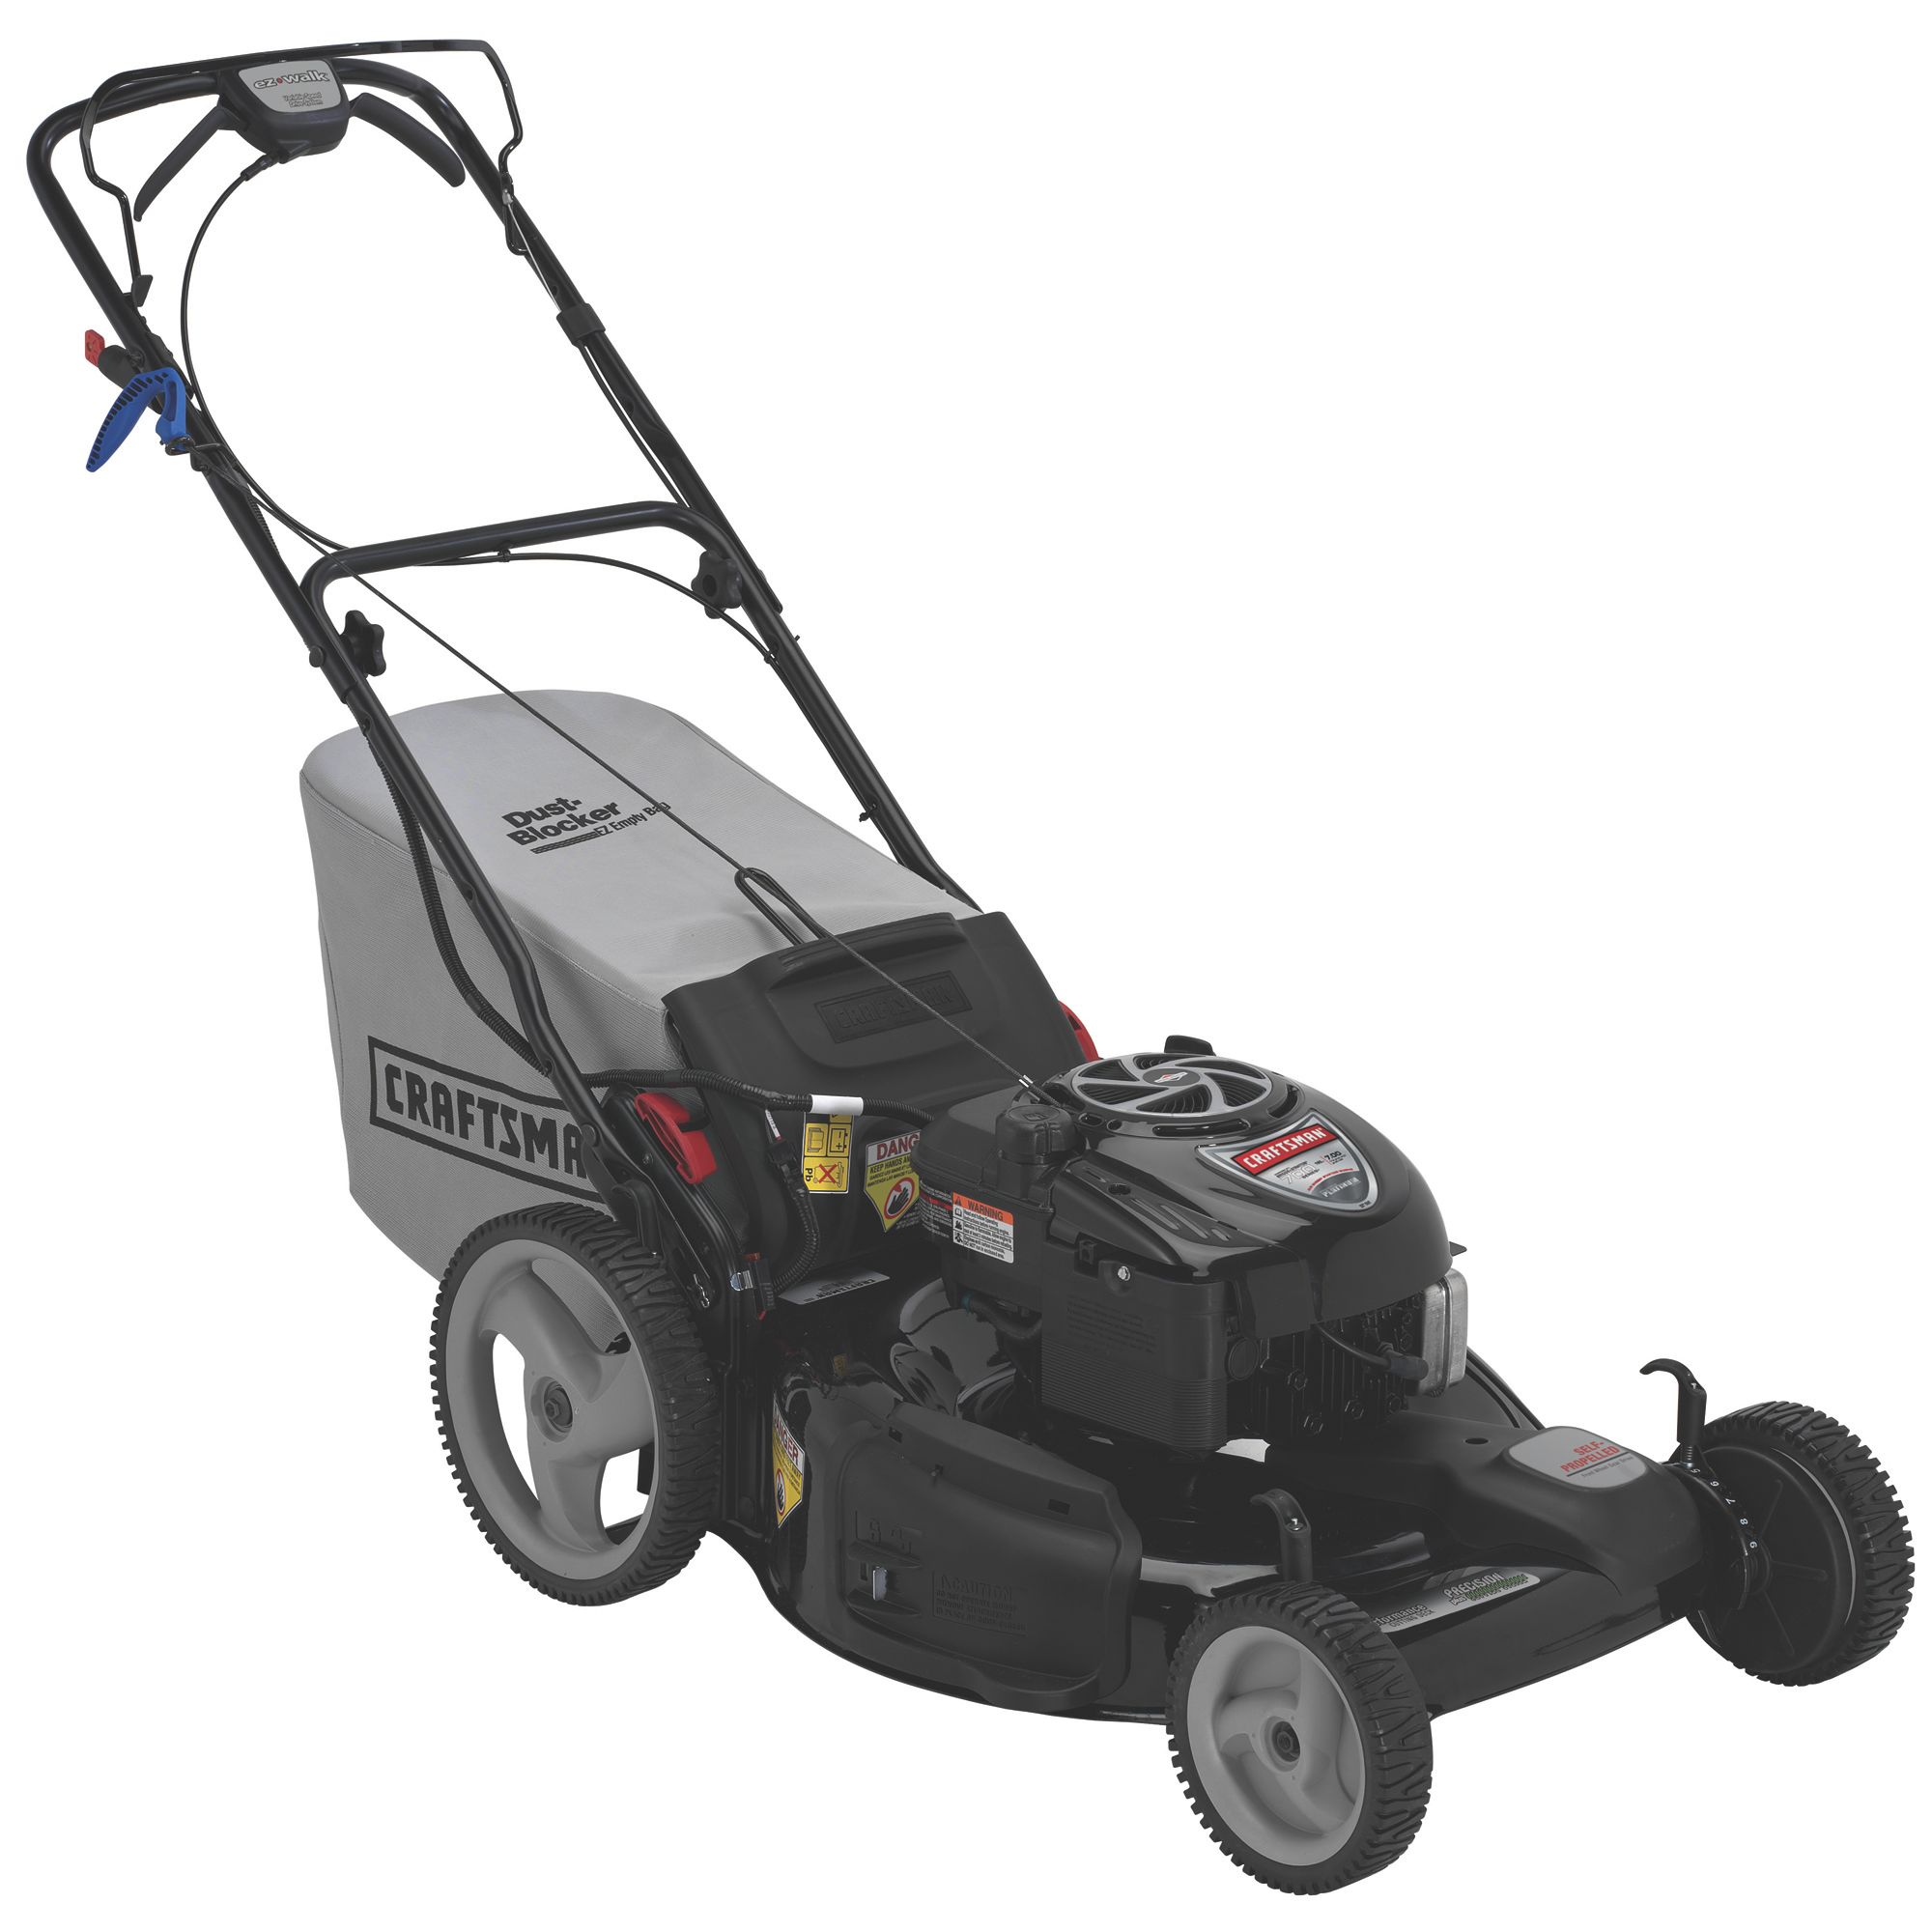 Craftsman 37659 Front Propelled Rear Bag Lawn Mower with High Wheels